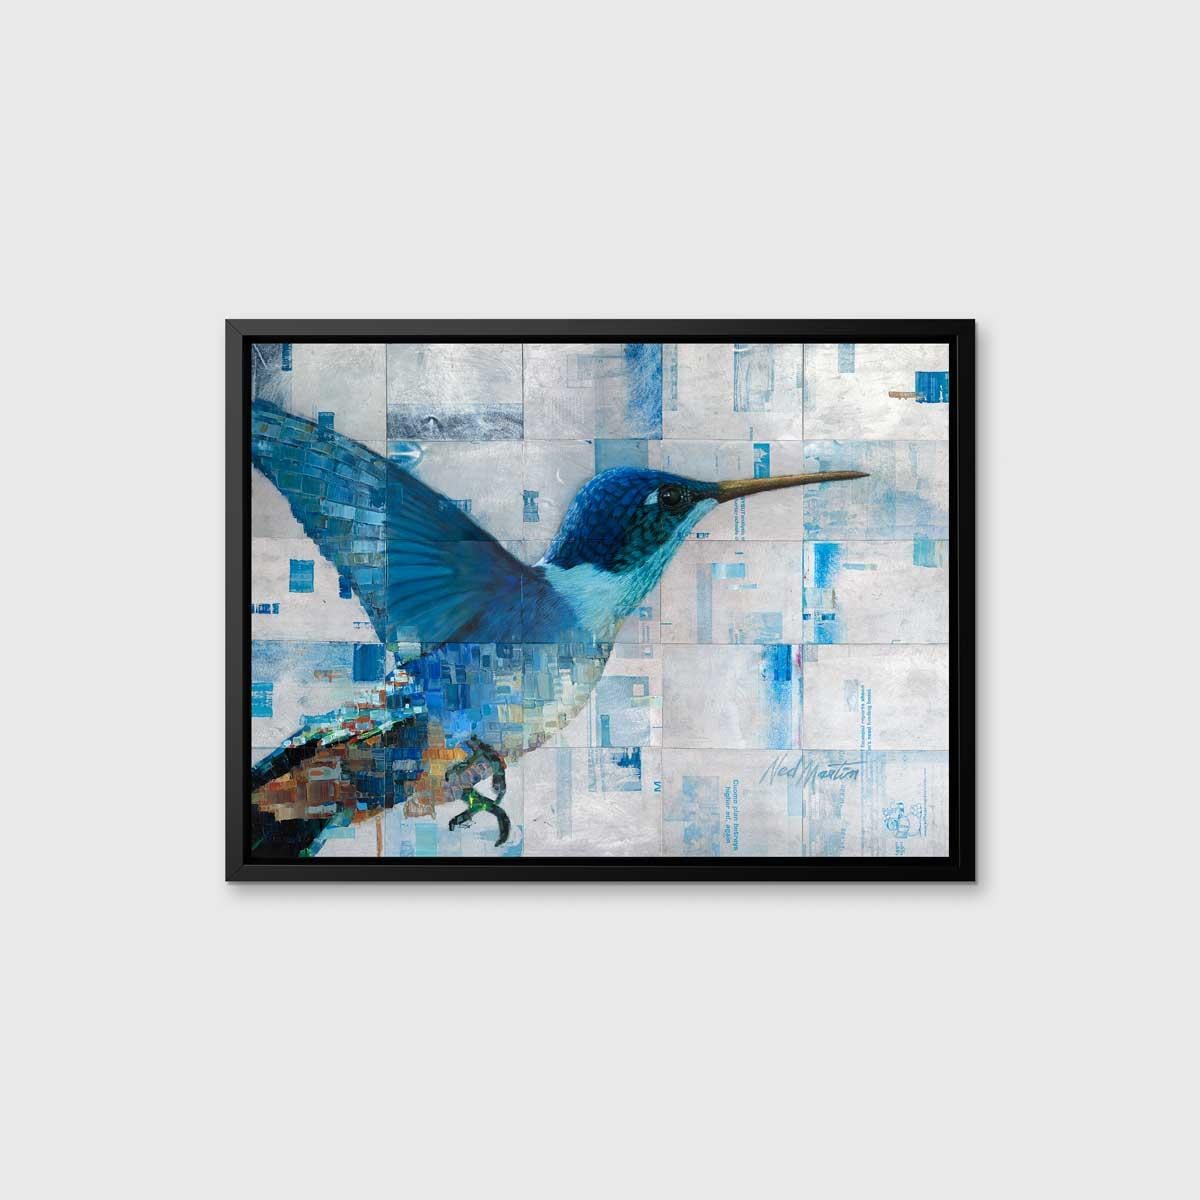 This abstract limited edition print by Ned Martin features a large hummingbird as the central focus. The hummingbird is varying shades of blue and warm orange tones, while an abstracted background layers silver and blue squares next to, and overtop